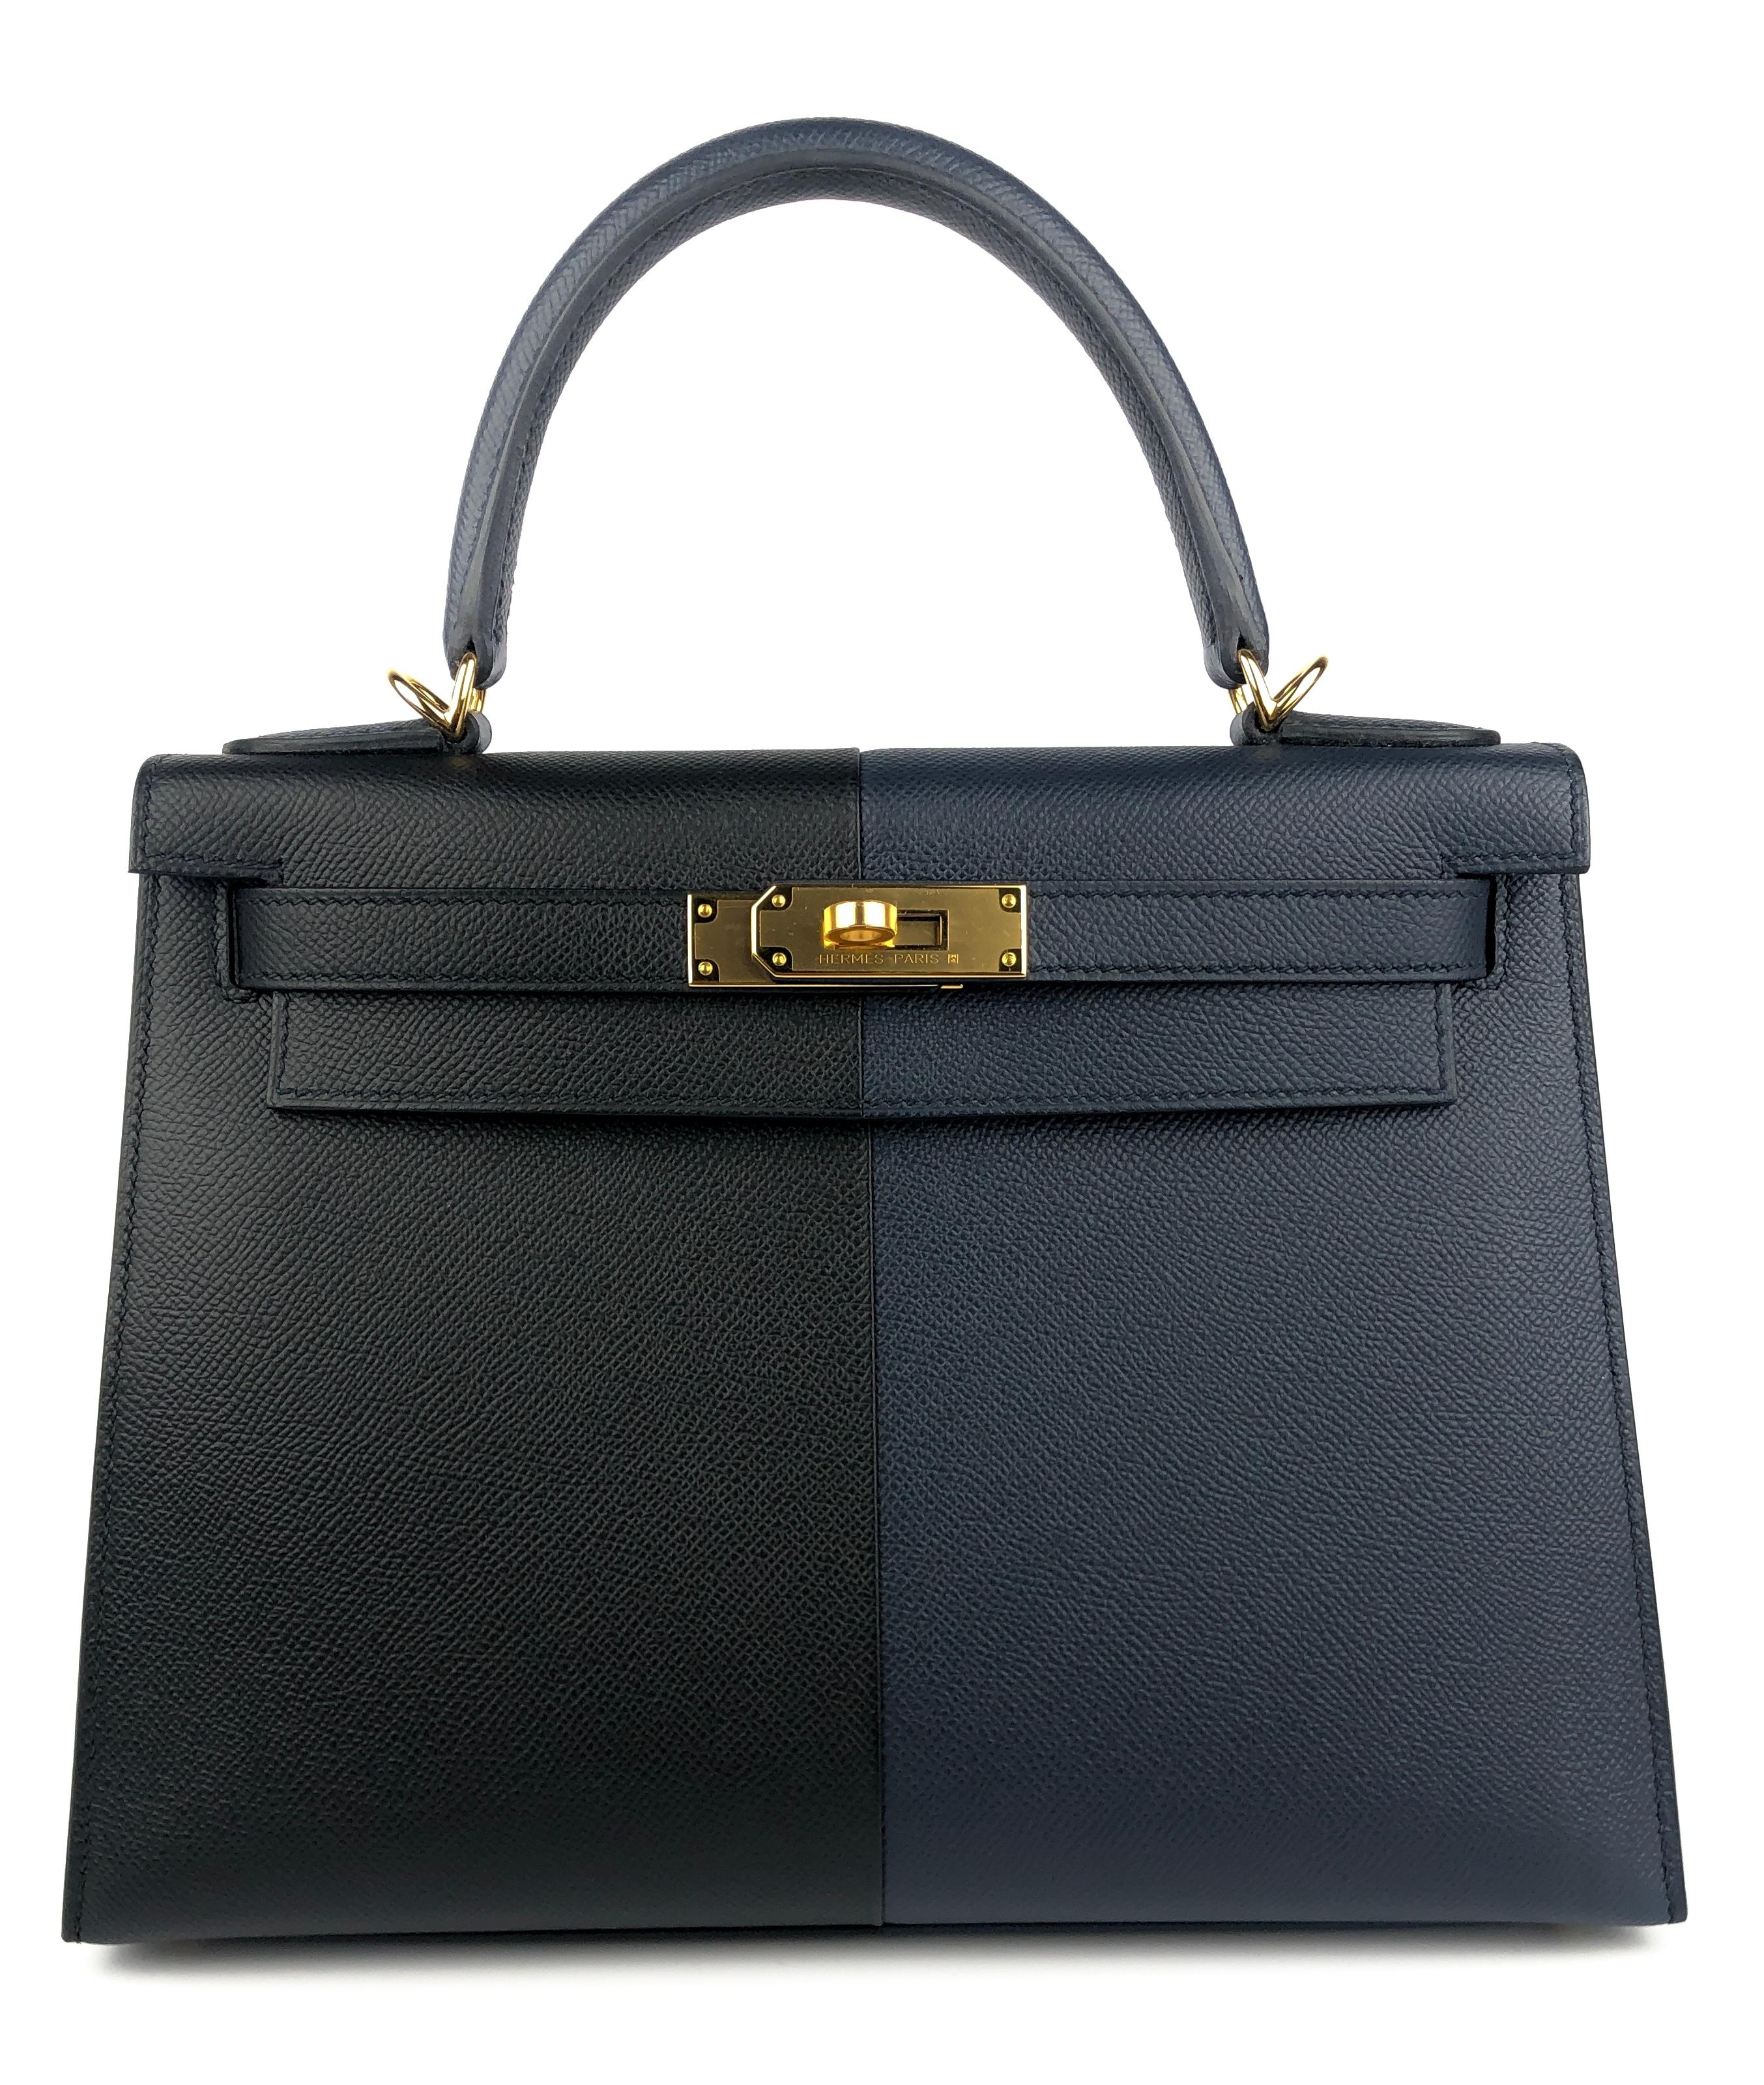 Absolutely Stunning Rare As New Limited Hermes Kelly 28 Sellier Casaque Tri Color Black, Blue Indigo and Blue Frida Epsom Leather complimented by Gold Hardware. As New with Plastic on all hardware and feet. 2020 Y Stamp. 

Shop with Confidence from